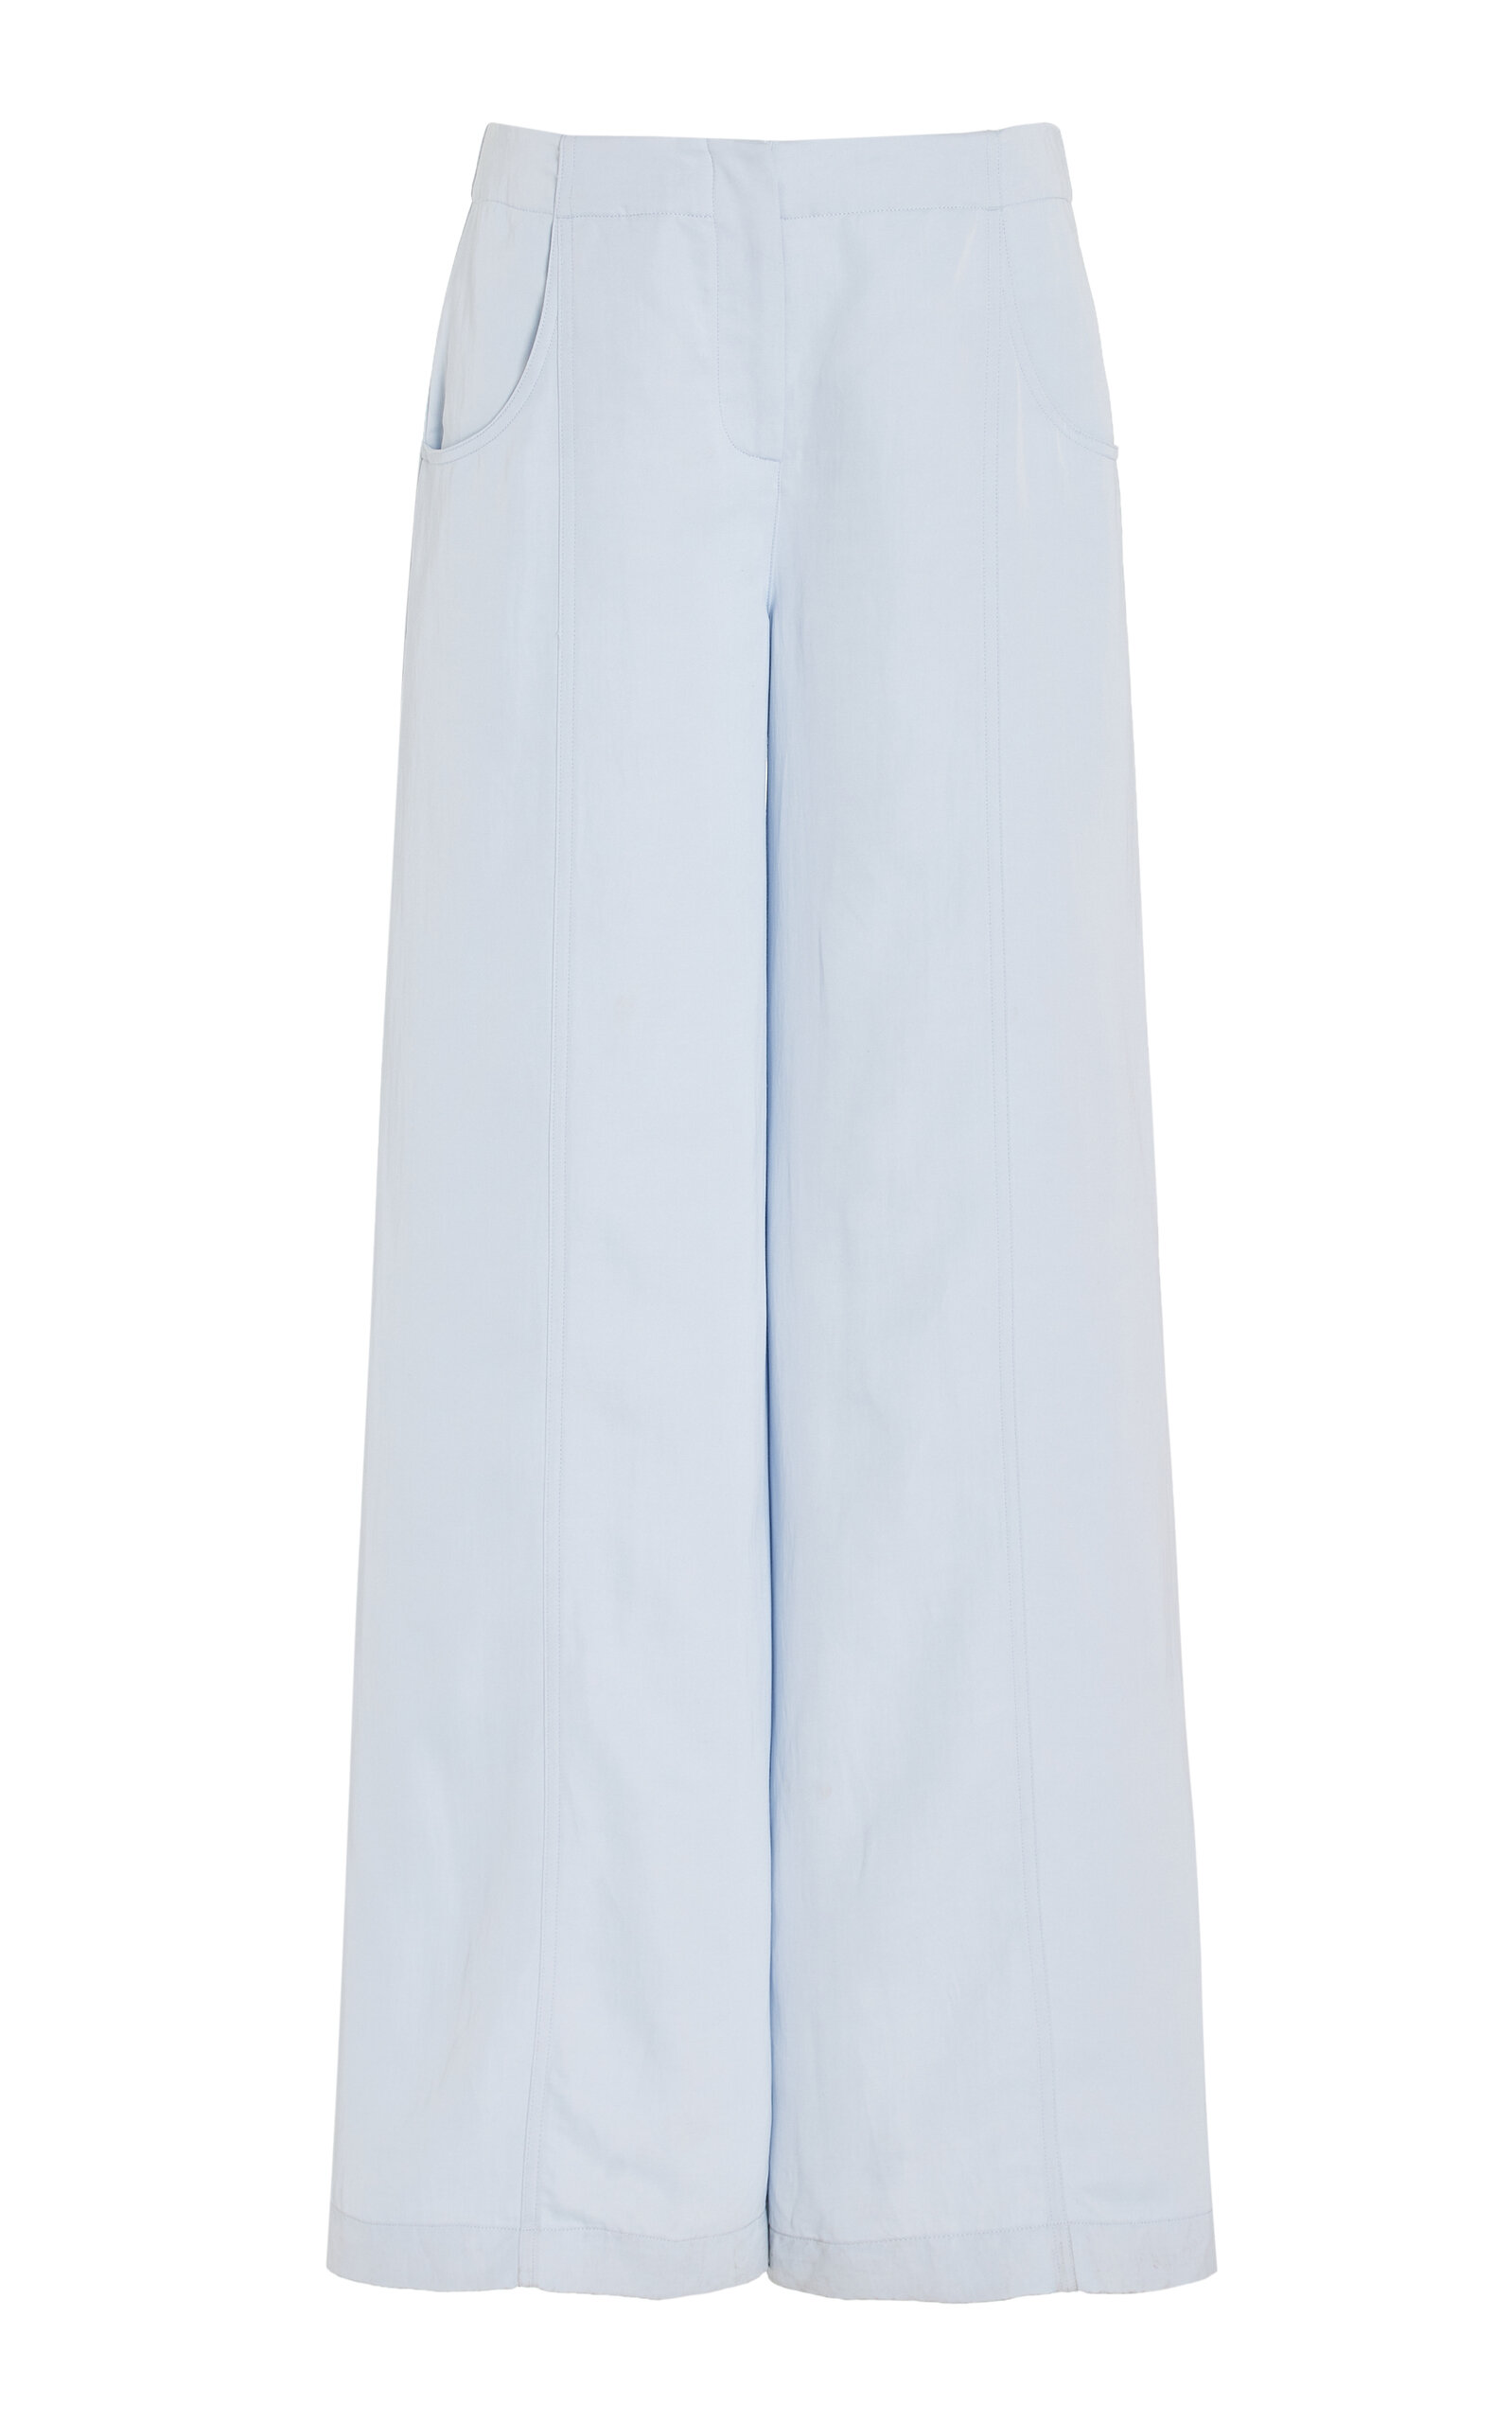 Twp Exclusive Demie Flared Pants In Light Blue